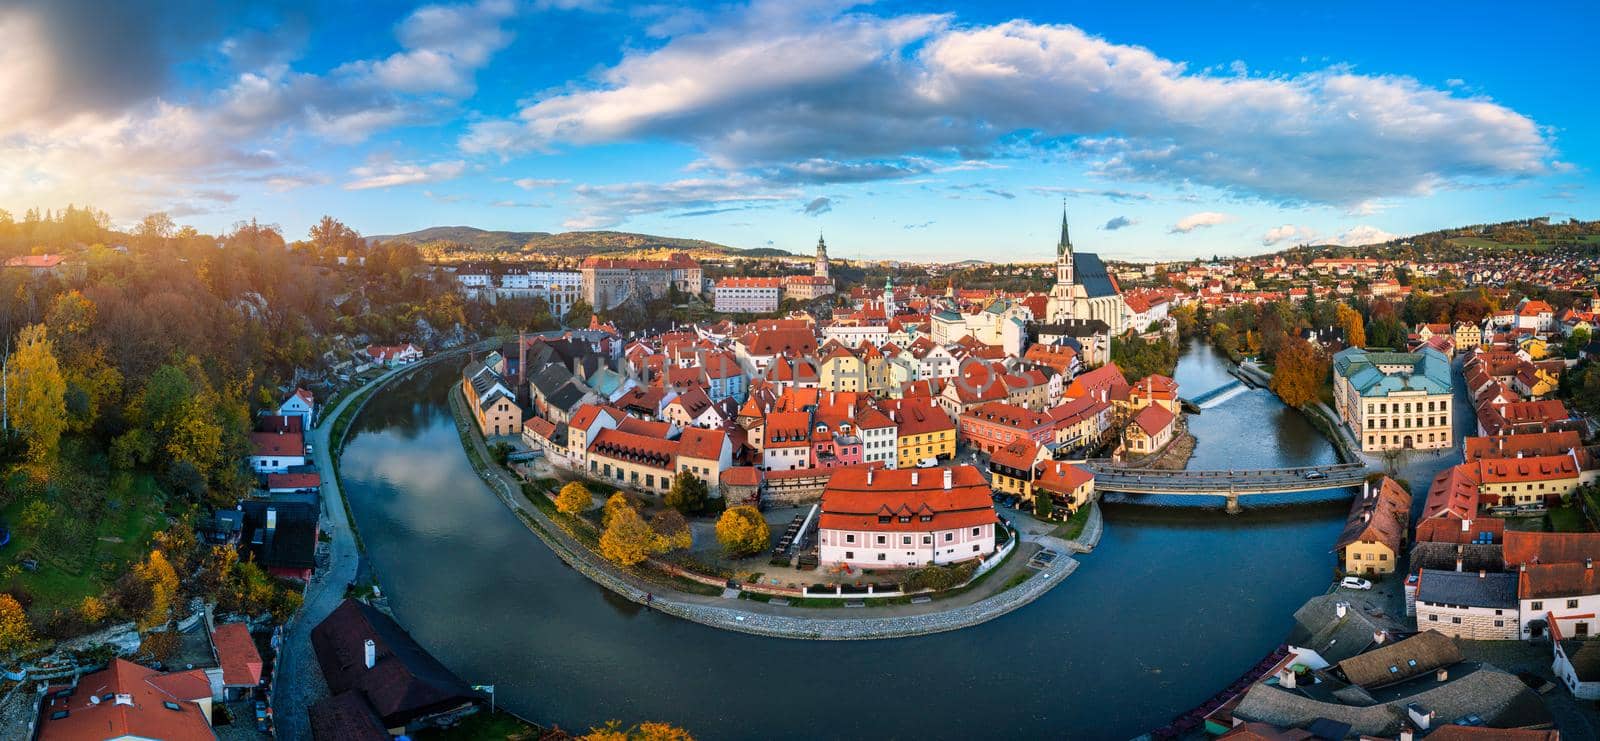 Panoramic view of Cesky Krumlov town on Vltava riverbank on autumn day overlooking medieval Castle, Czech Republic. View of old town of Cesky Krumlov, South Bohemia, Czech Republic.